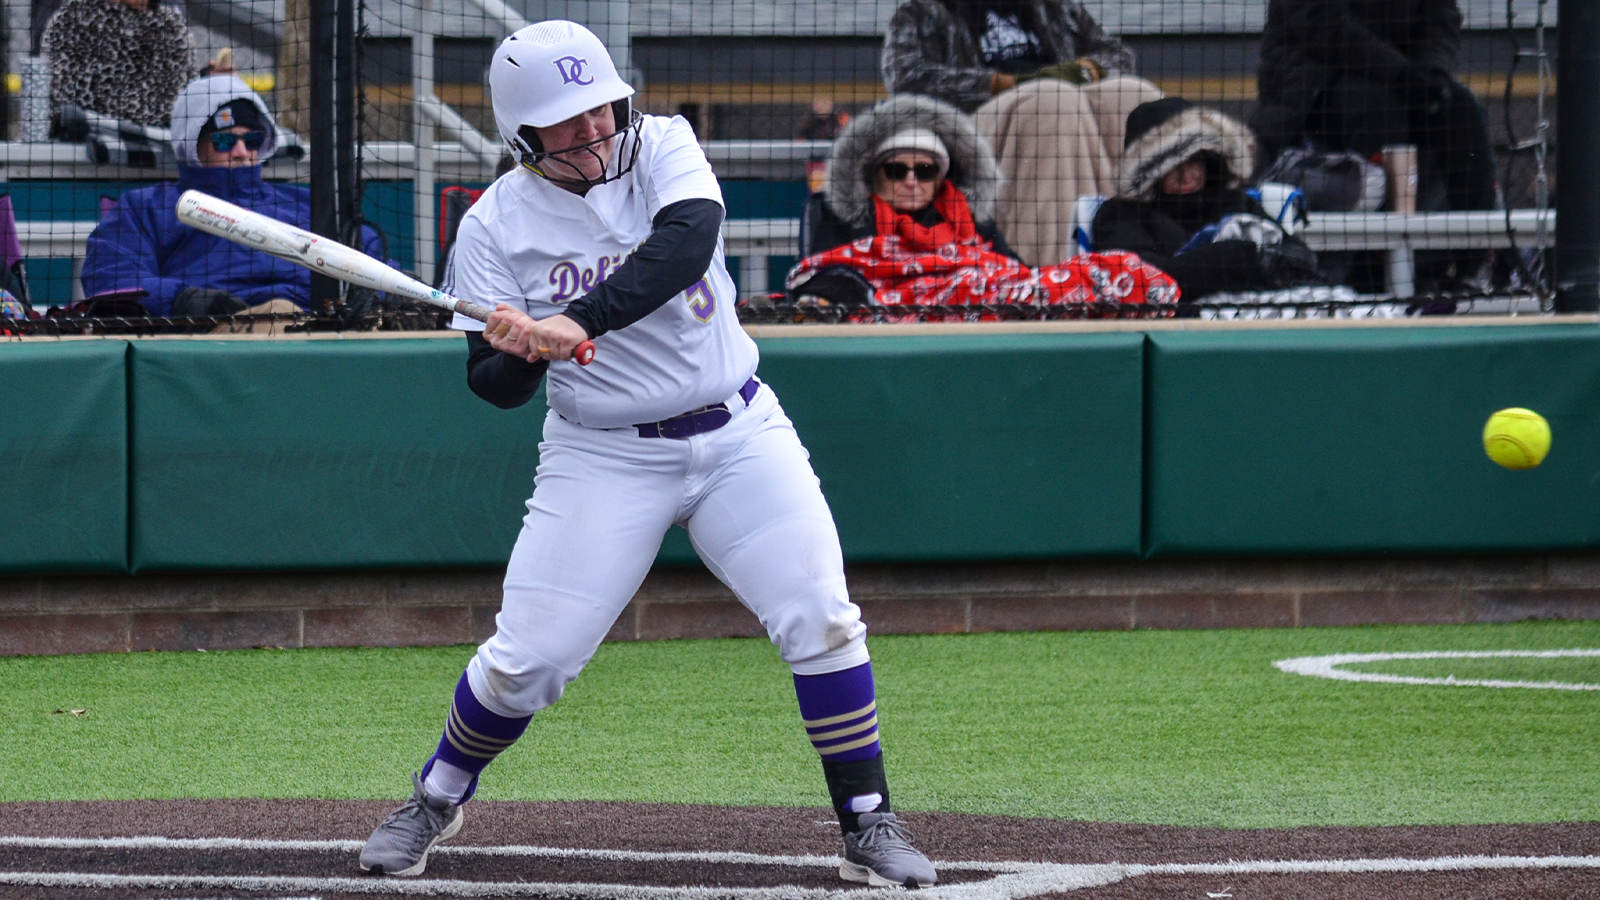 Winning streak up to five games for DC softball after two close wins at Heidelberg